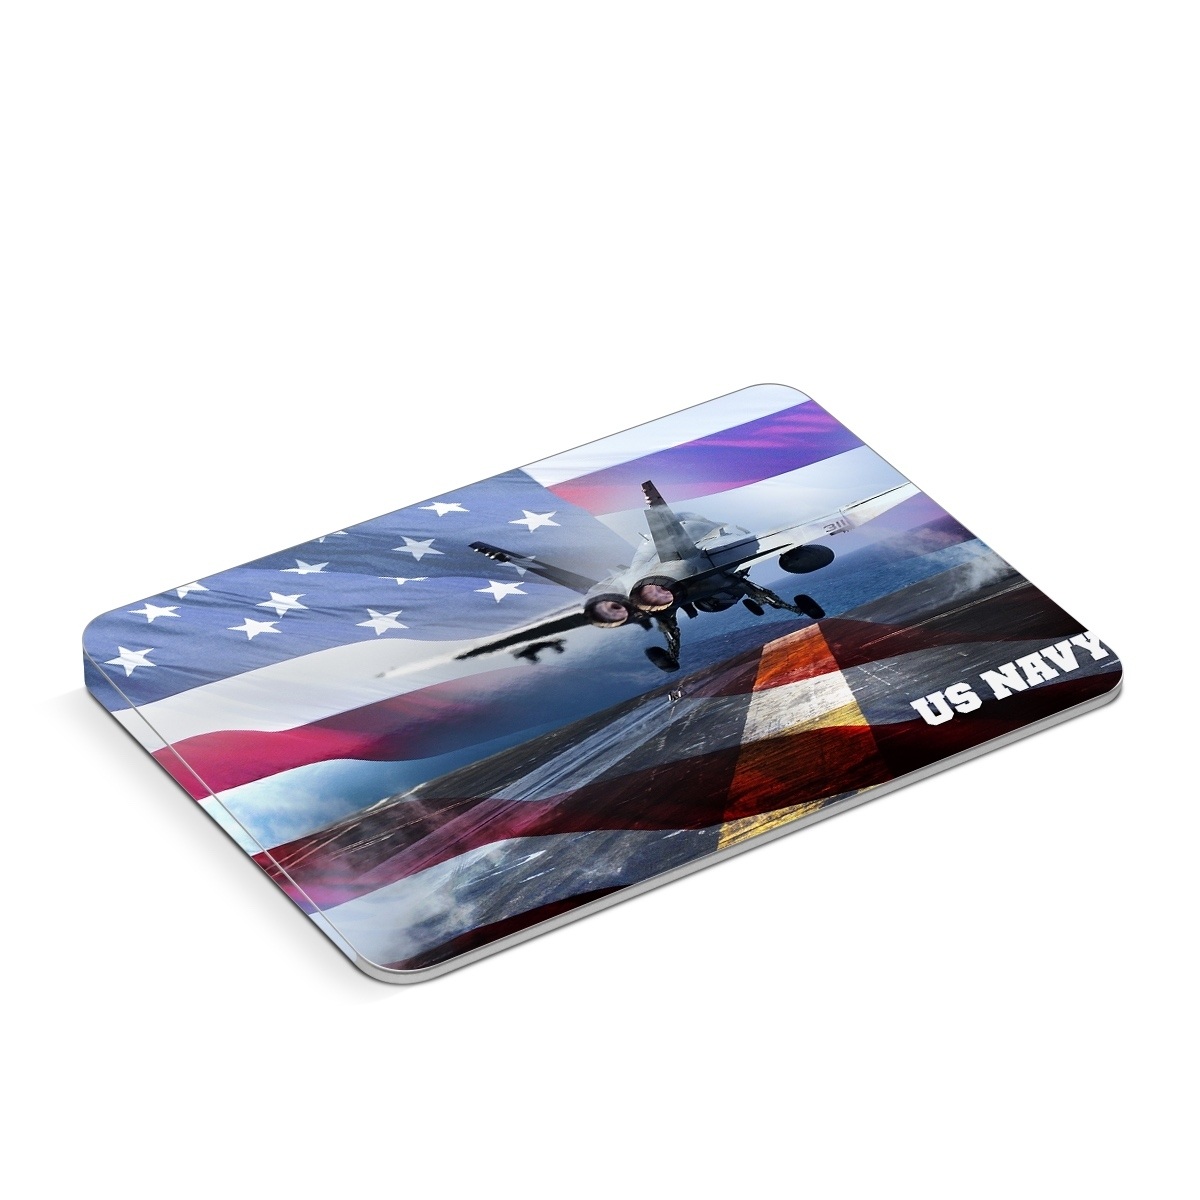 Apple Magic Trackpad Skin design of Airplane, Aircraft, Aviation, Vehicle, Airline, Aerospace engineering, Air travel, Air force, Sky, Flight, with gray, black, blue, purple colors